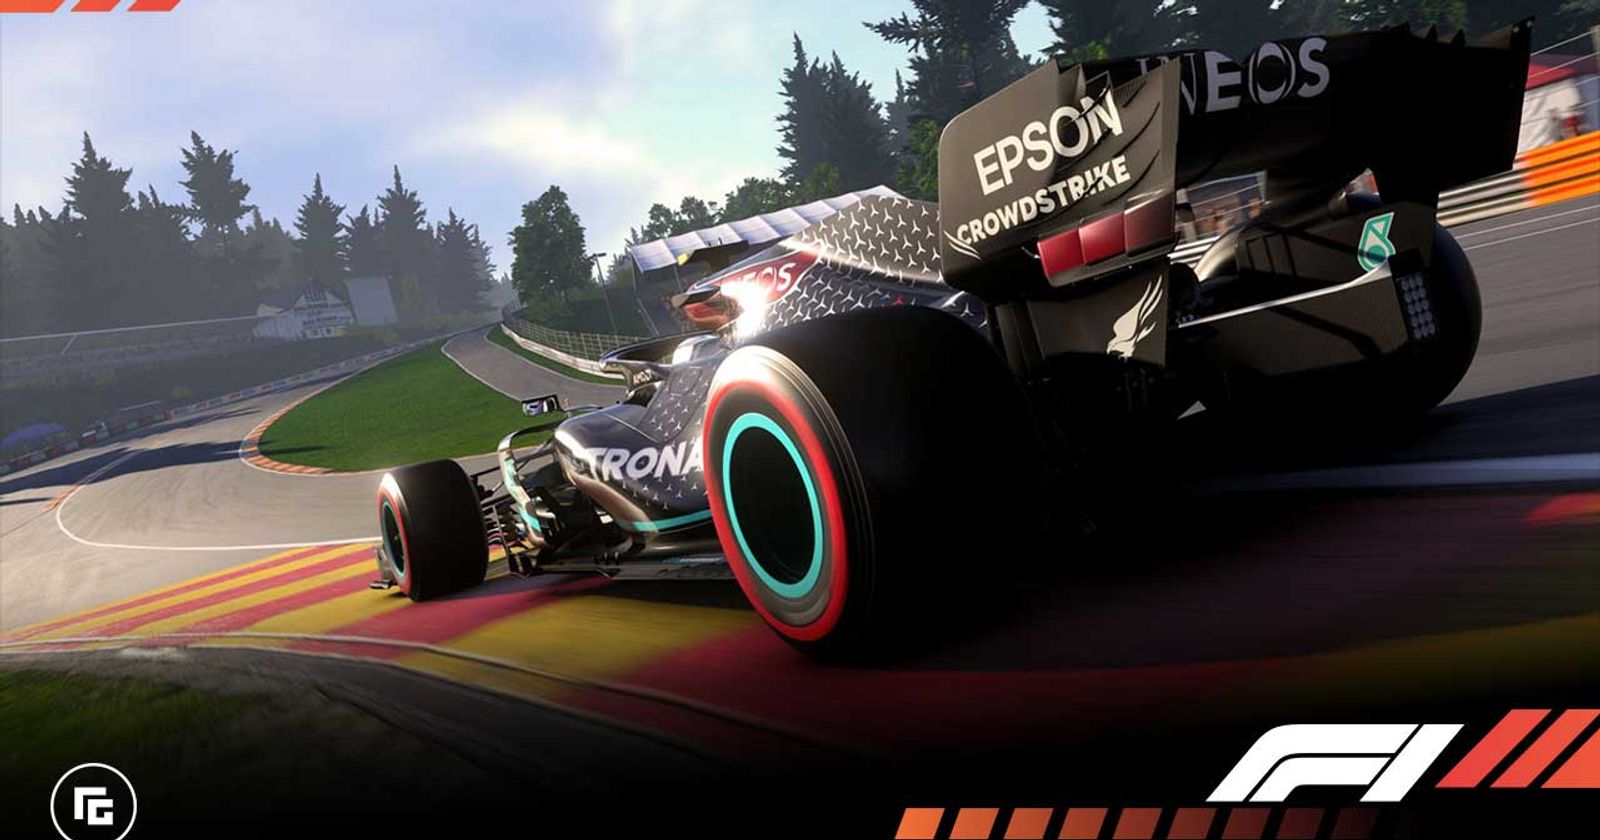 Crossplay Has Arrived : r/F1Game